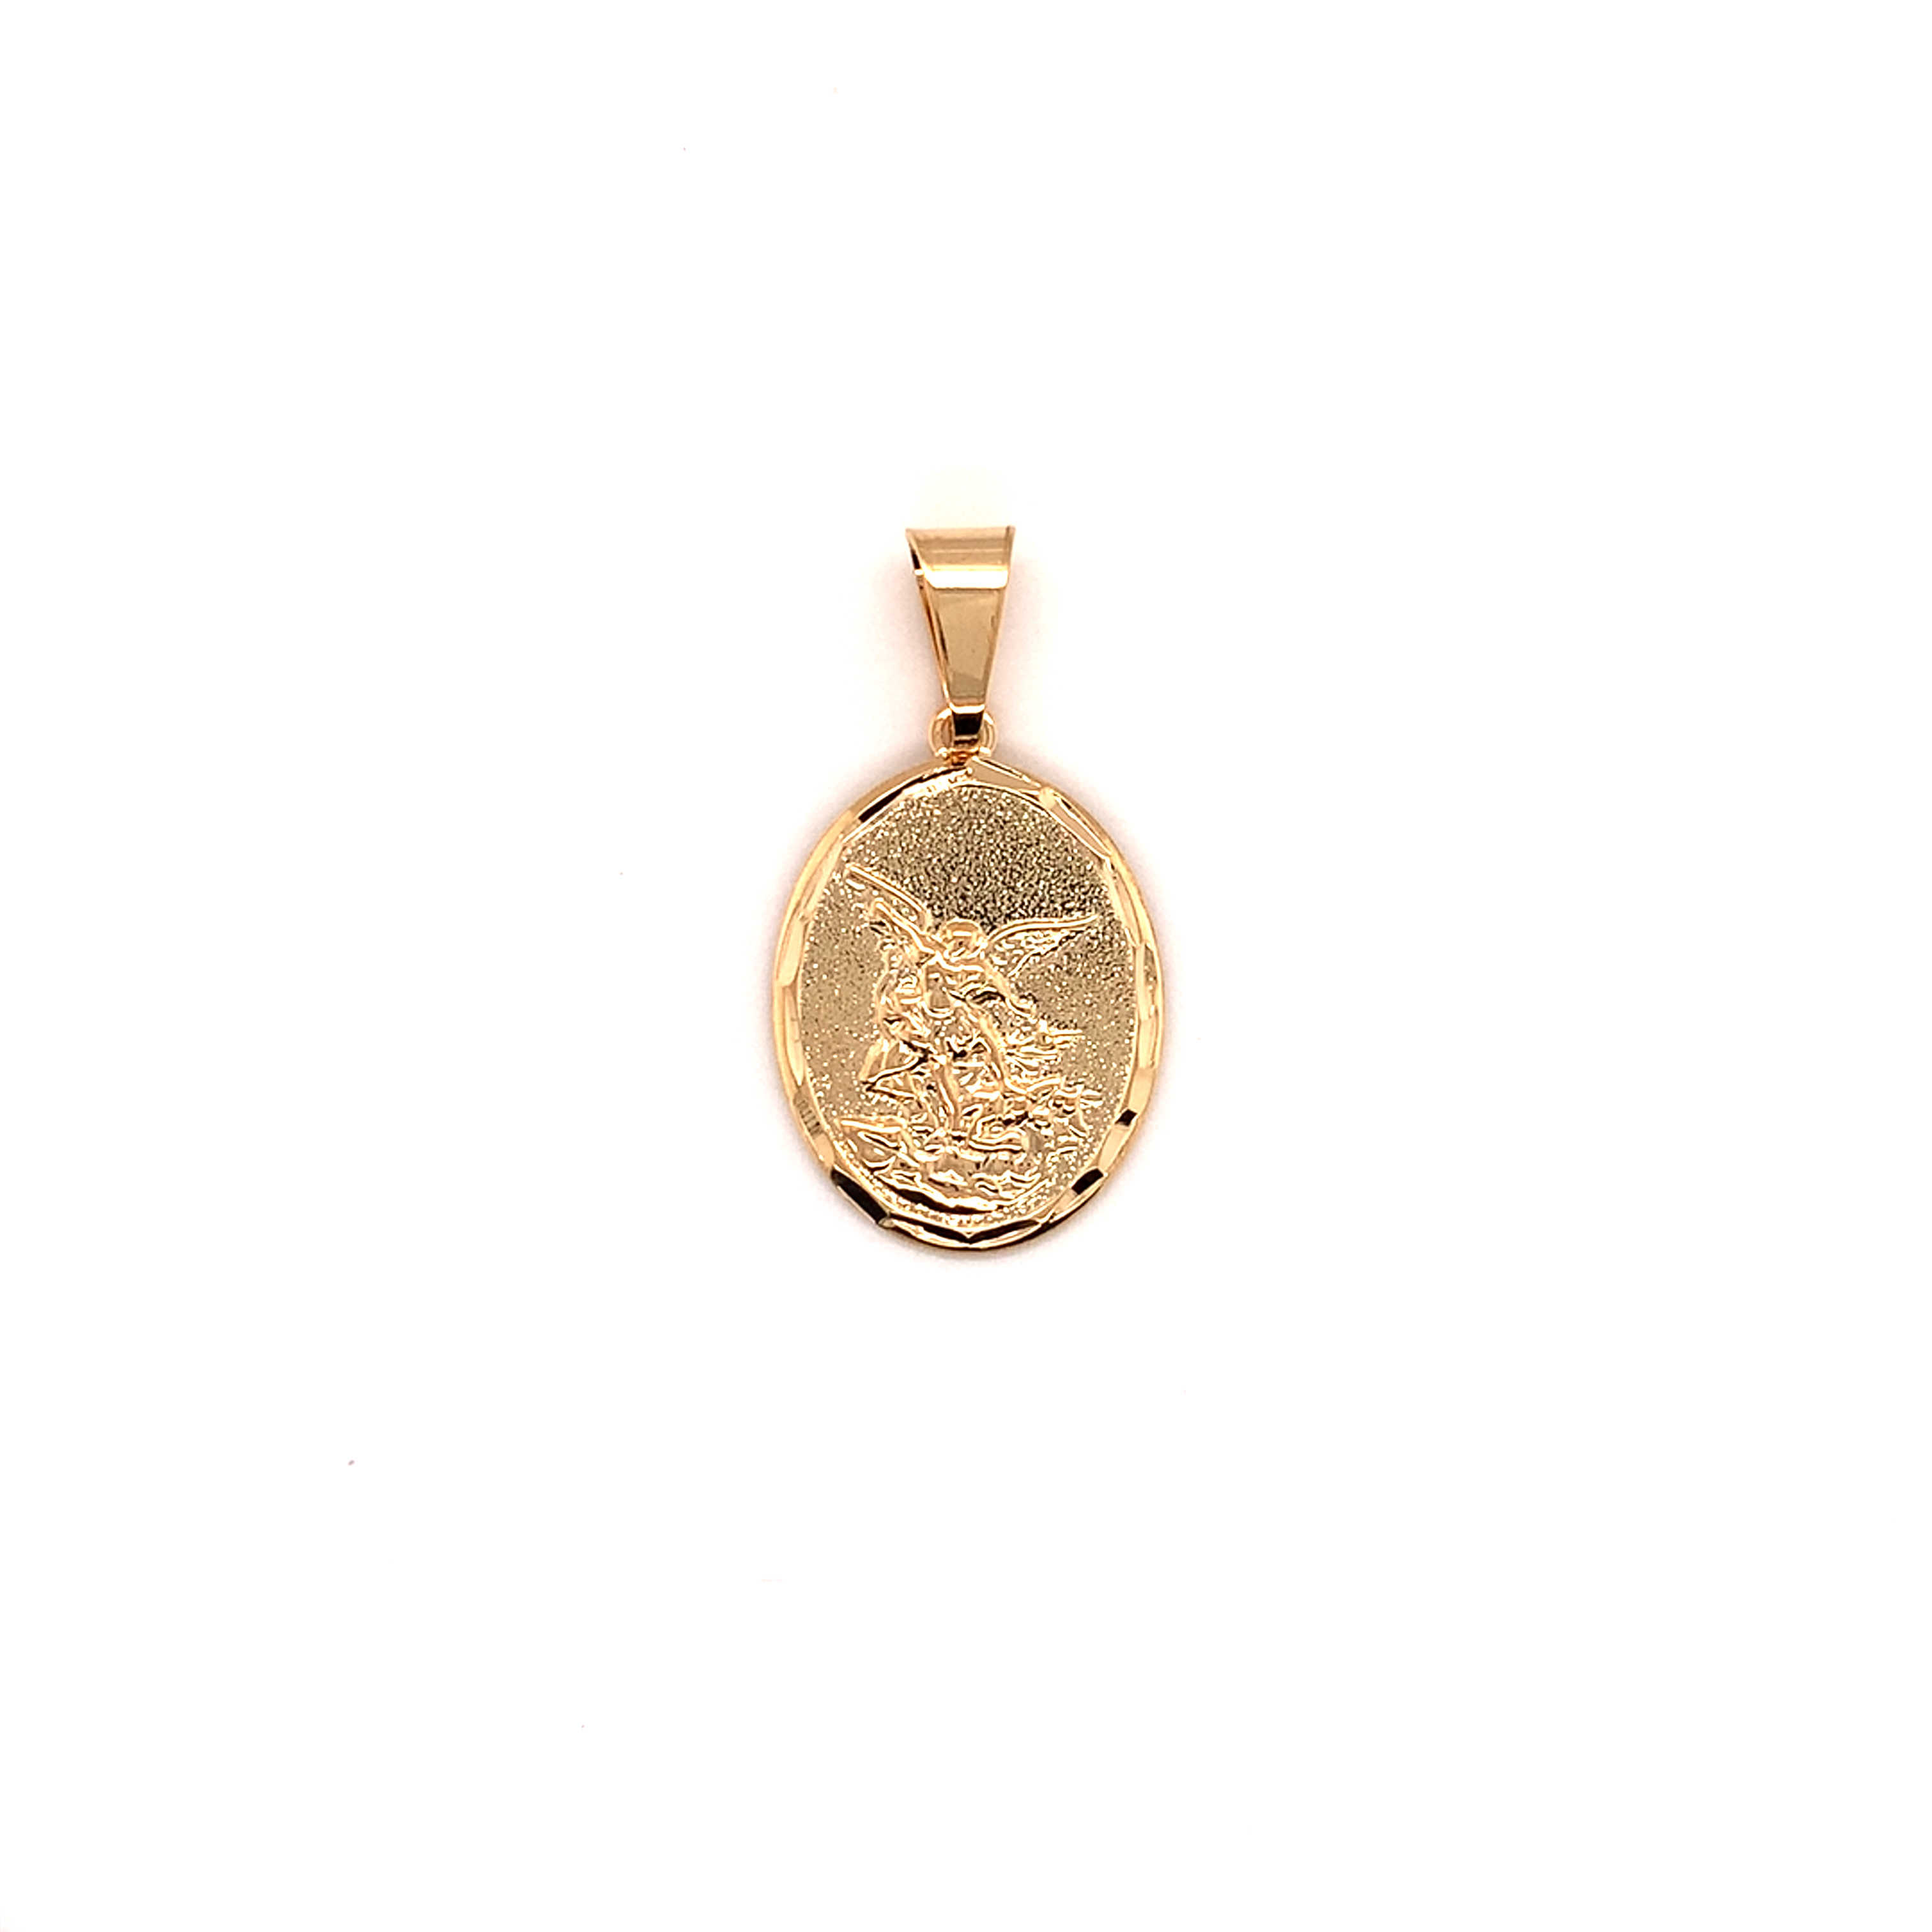 St. Michael the Archangel Pendant - Gold Filled